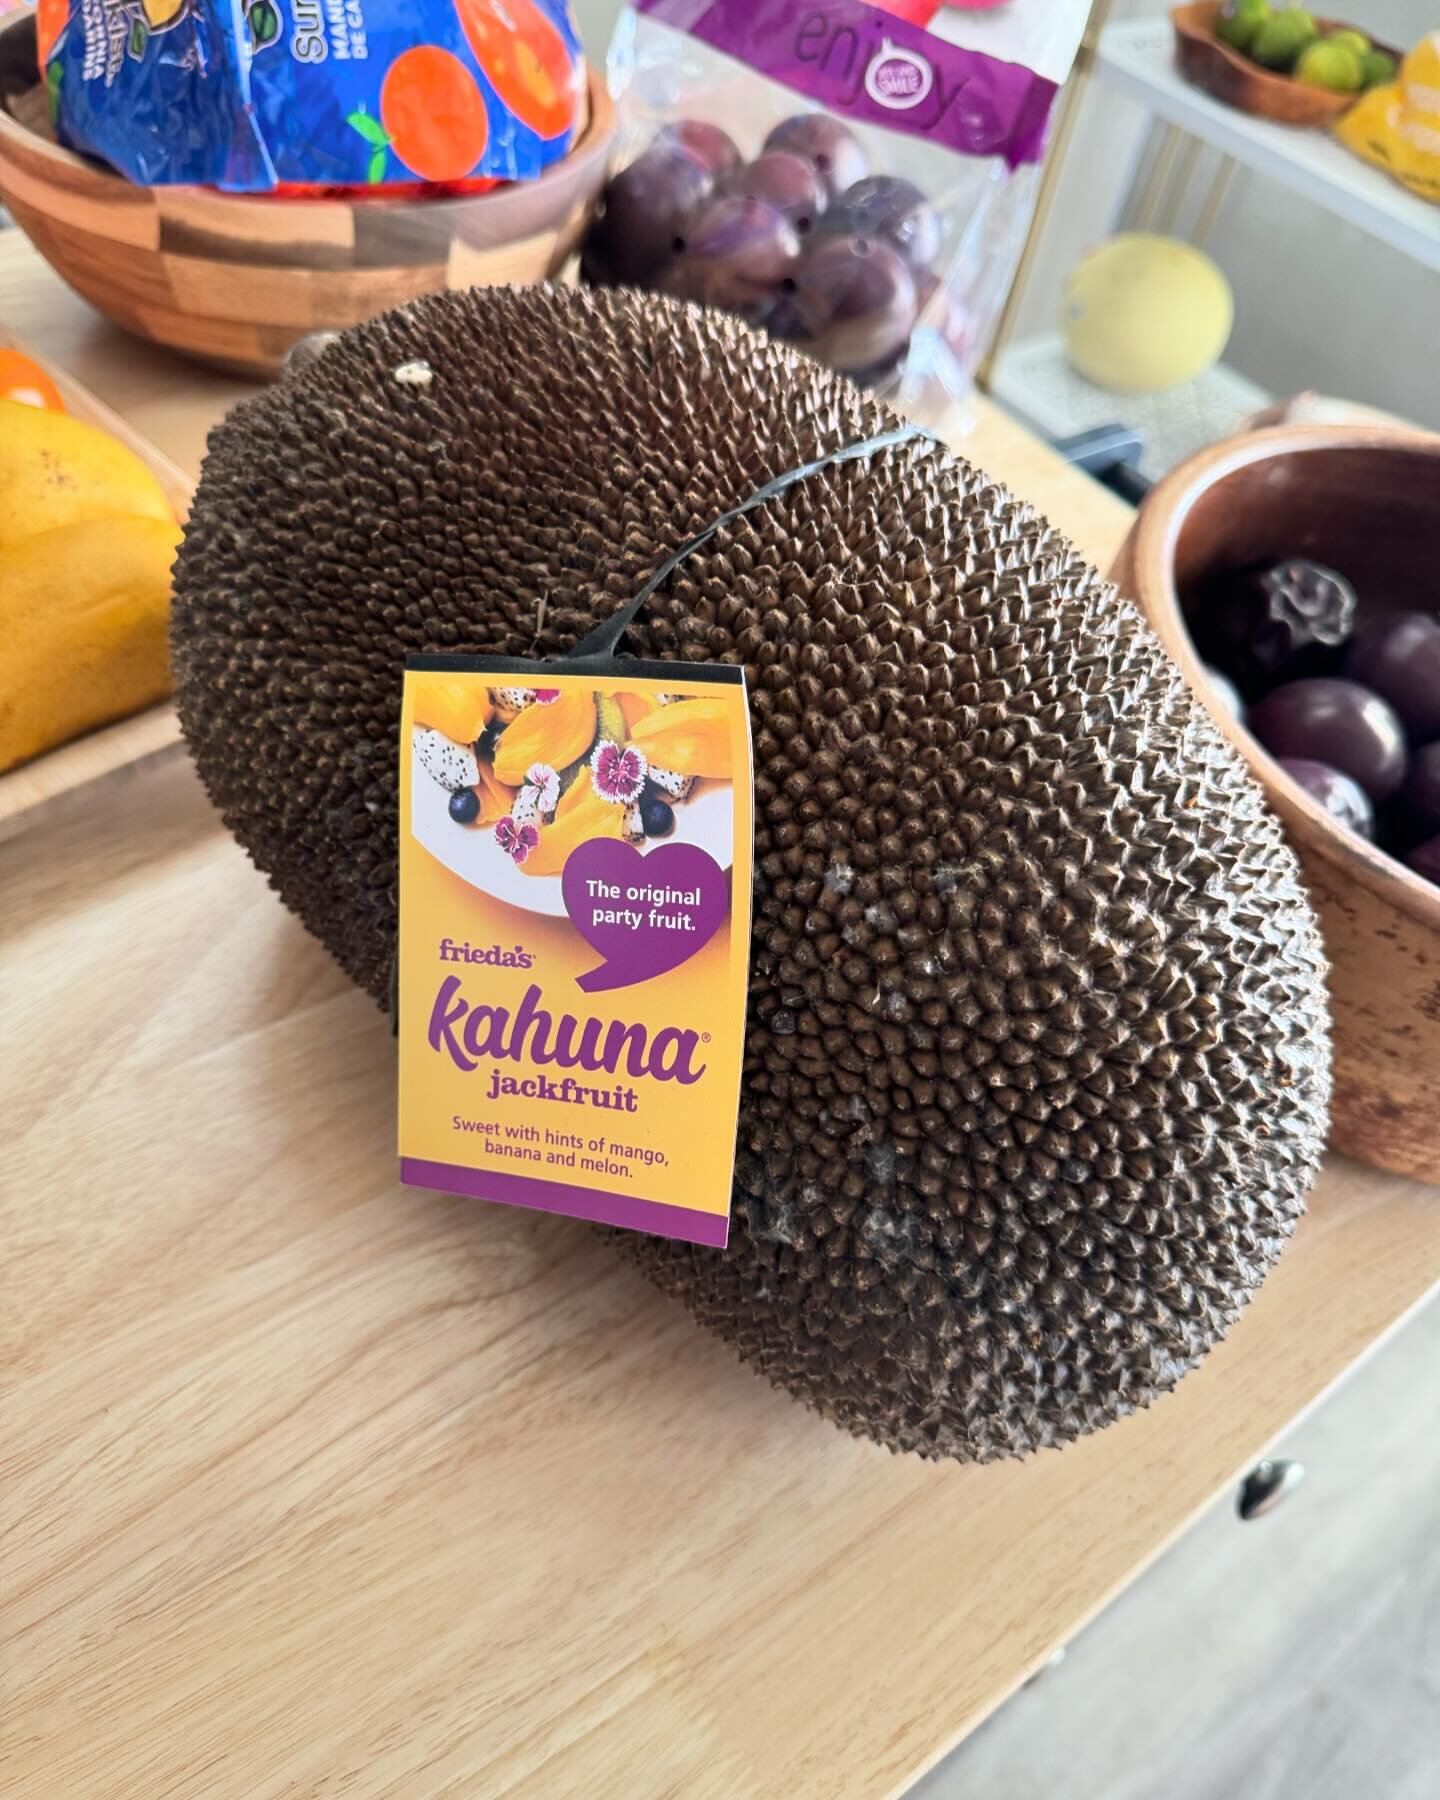 I got this jackfruit in Whole Foods and I just have some questions . 
I&rsquo;ve never seen the inside parts be brown , the bulbs still taste okay 6/10 in comparison to the 9/10 jackfruit I ate in Miami . 
What are your thoughts ? I heard jackfruit i